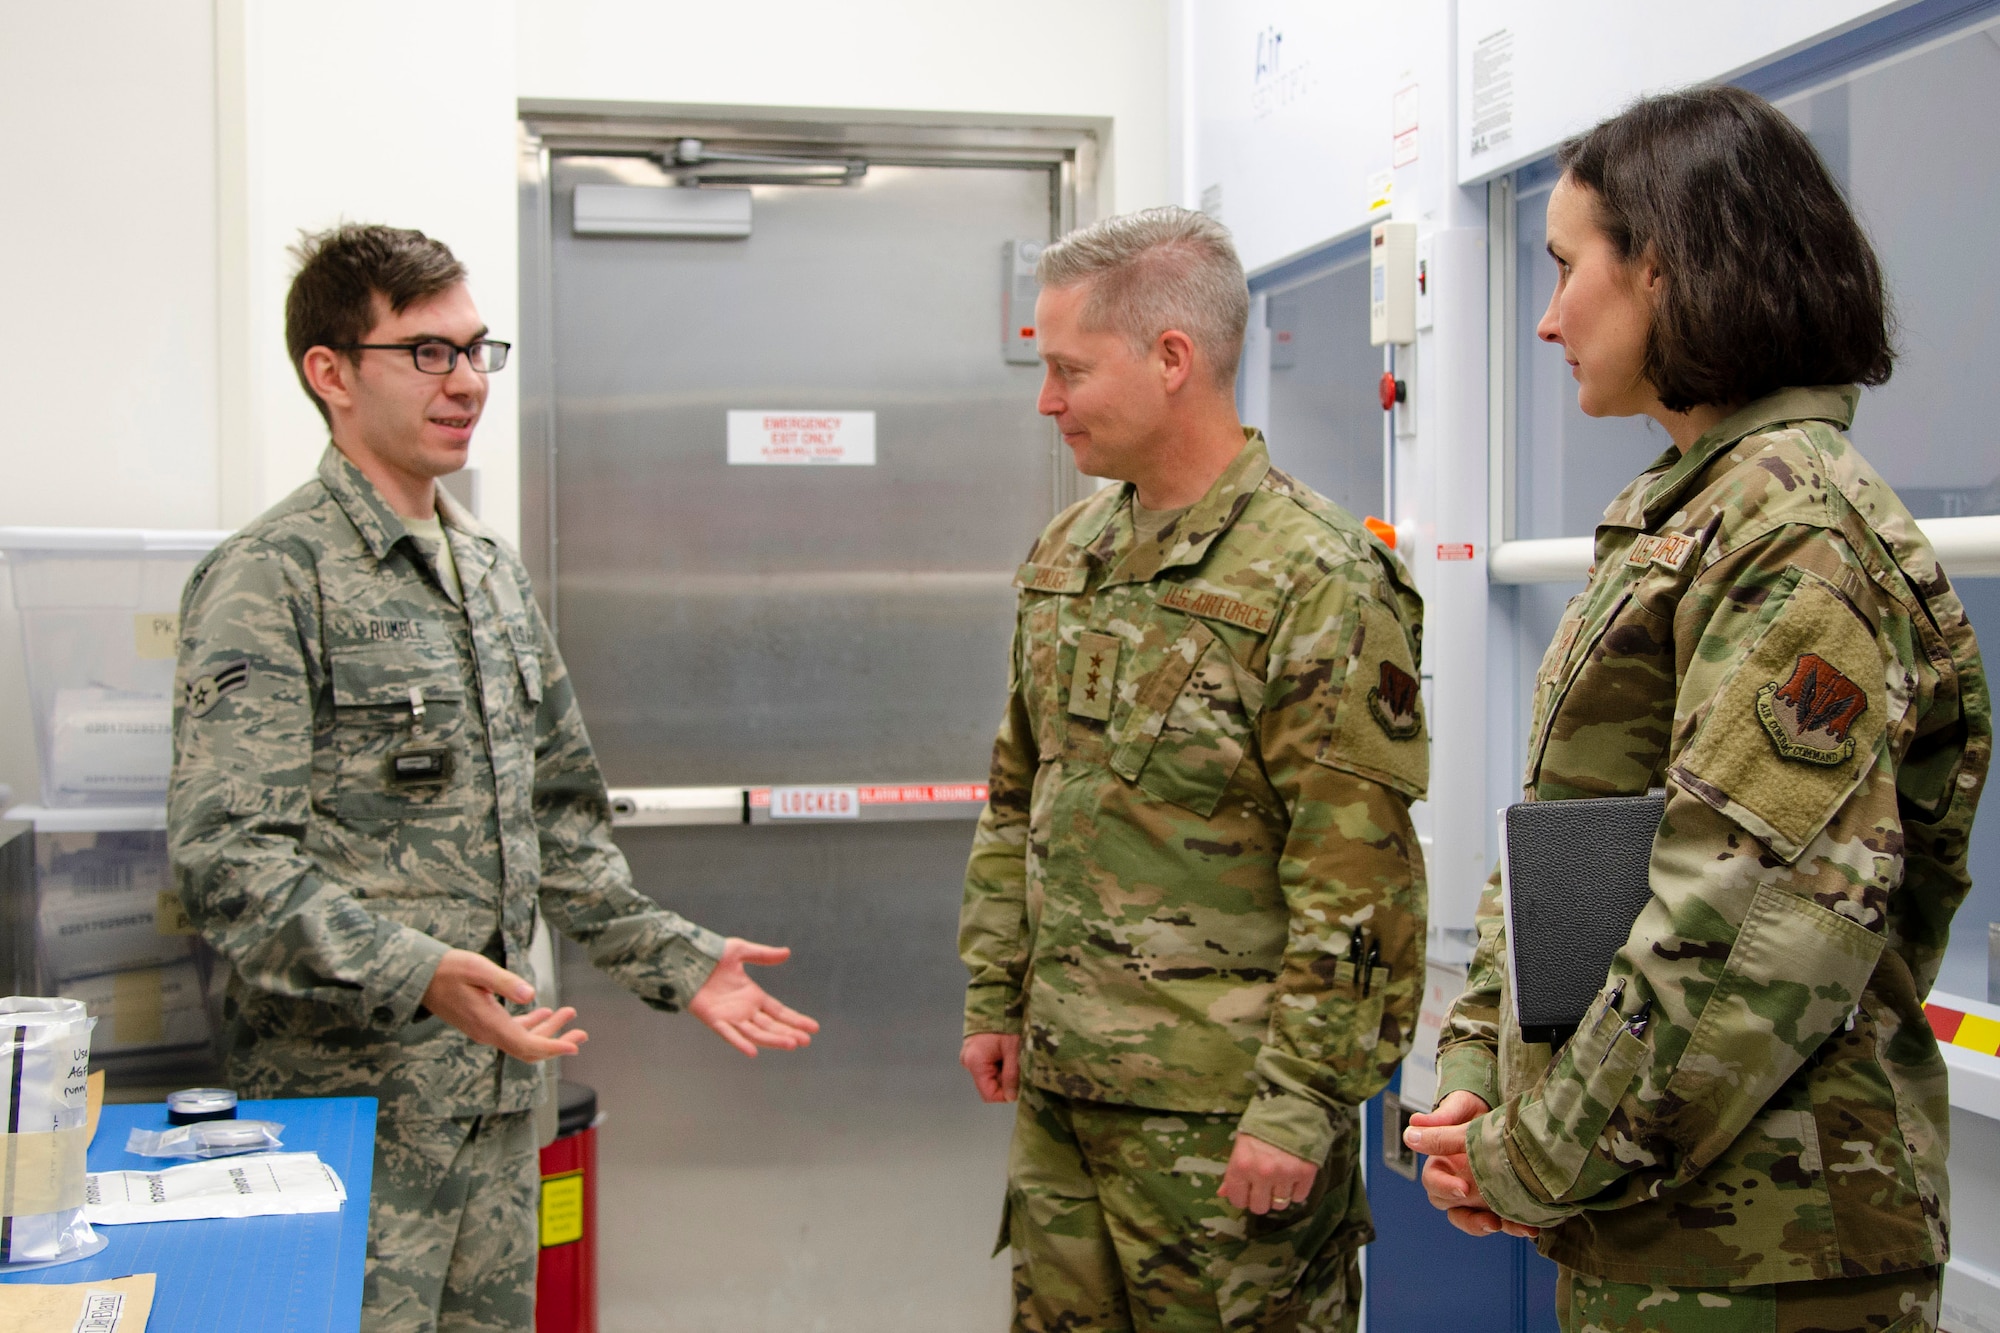 Airman 1st Class Ethan Rumble (left), a sample control technician at the Air Force Radiochemistry Laboratory, Patrick AFB, Fla., describes to 16th Air Force (Air Forces Cyber) Commander Lt. Gen. Timothy Haugh (center) and 16th AF Command Chief Master Sgt. Summer Leifer how he processes radiologic samples that arrive at the lab for analysis as part of the Air Force Technical Applications Center's nuclear treaty monitoring mission.  Haugh and Leifer traveled from San Antonio to get a glimpse into AFTAC's instrumental role in 16th AF's information and multi-domain operations. (U.S. Air Force photo by Susan A. Romano)